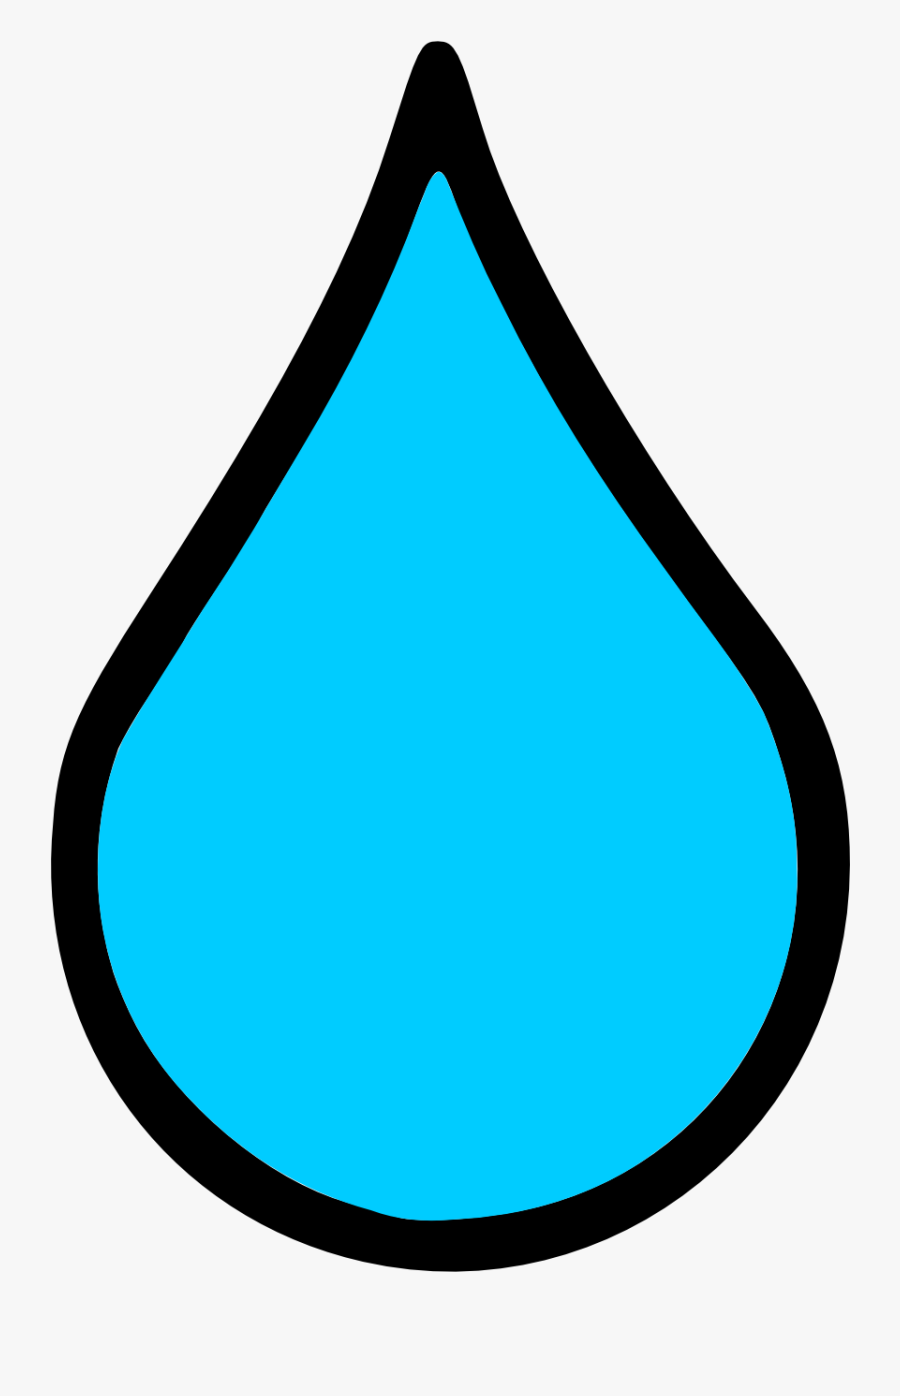 Droplet April Onthemarch Co - Water Droplet Clipart, Transparent Clipart